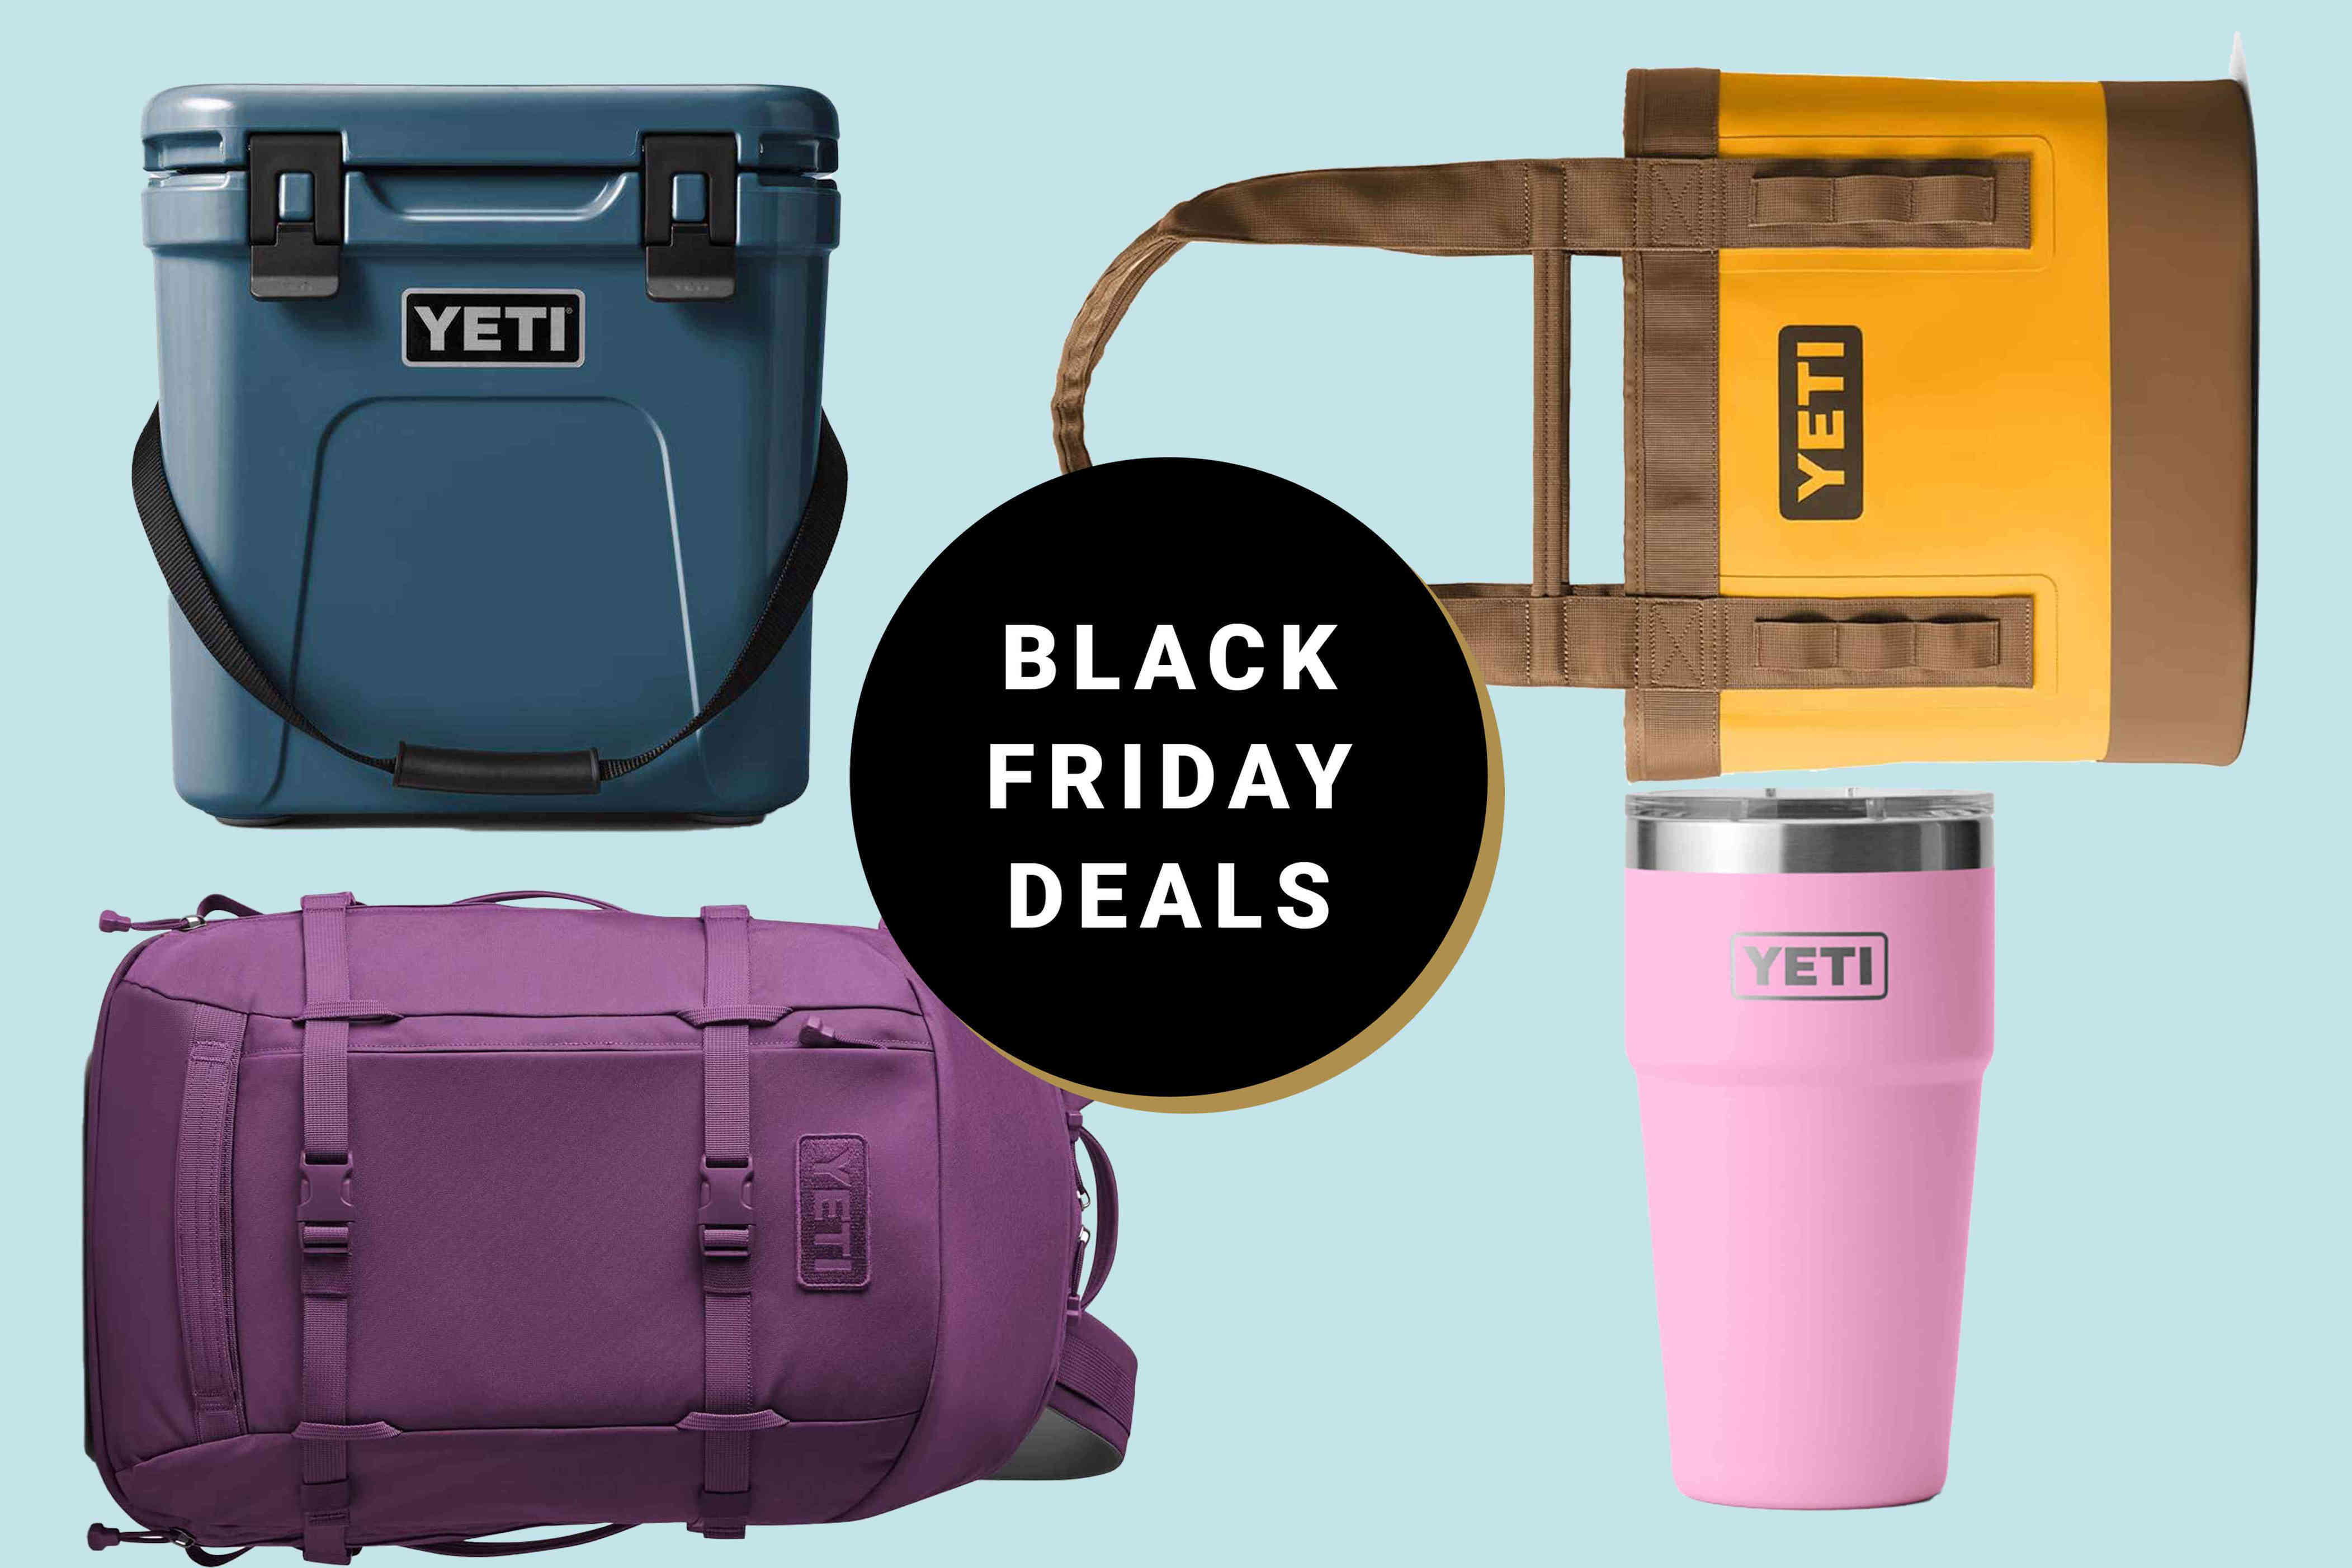 Yeti Black Friday Sales Are Rare — but We Found 12 Deals on Yeti